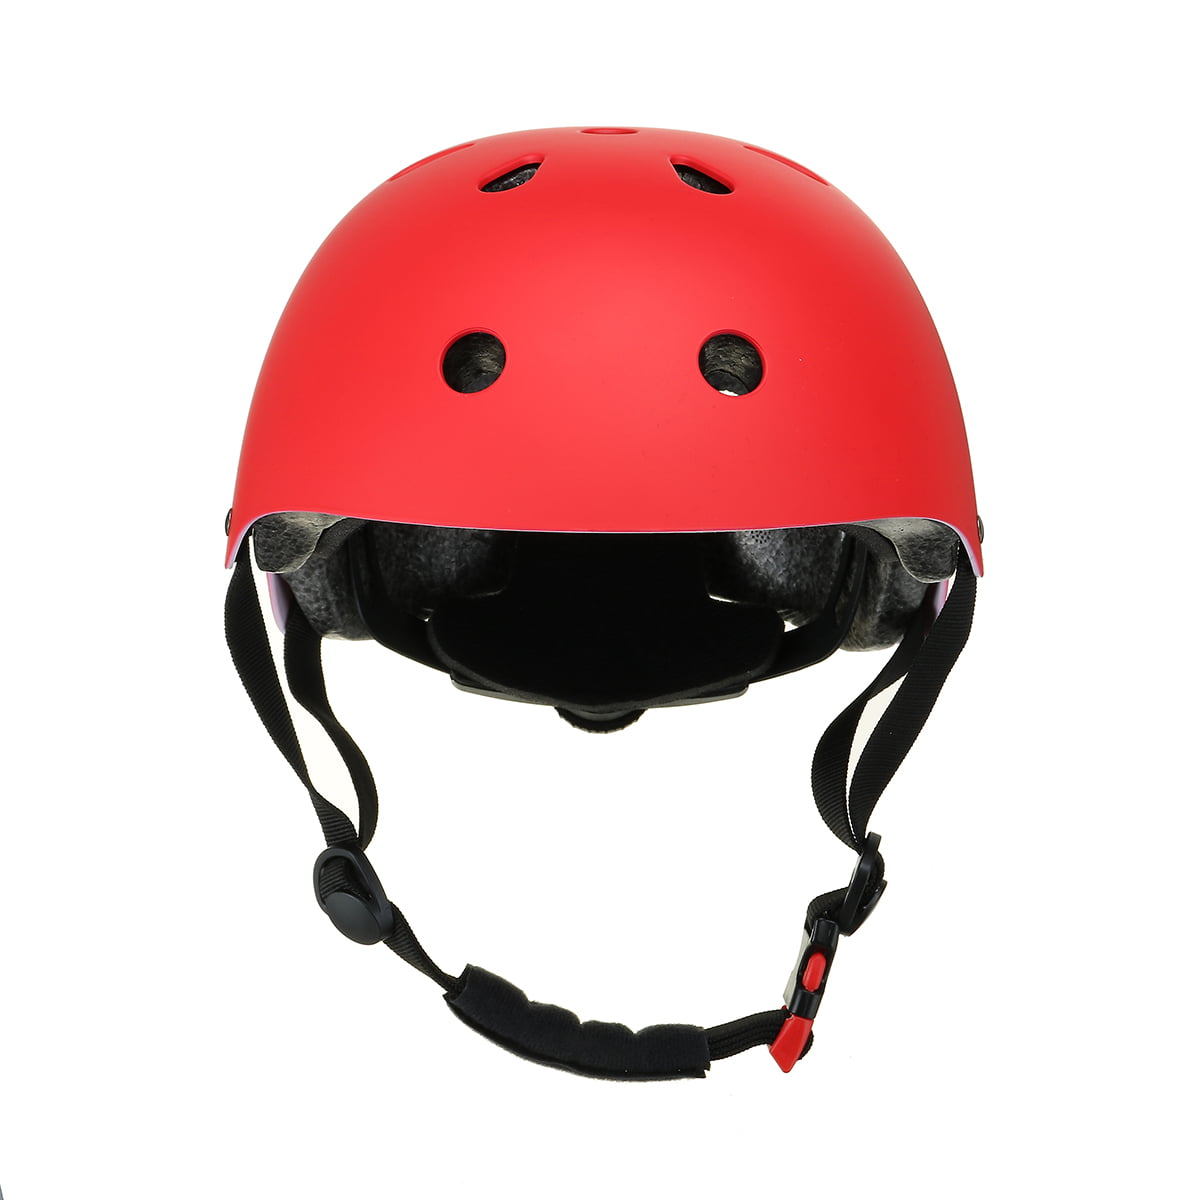 Red MTB Bike Cycling Helmet Bicycle Motorcycle Skateboard Head Protection Safe 